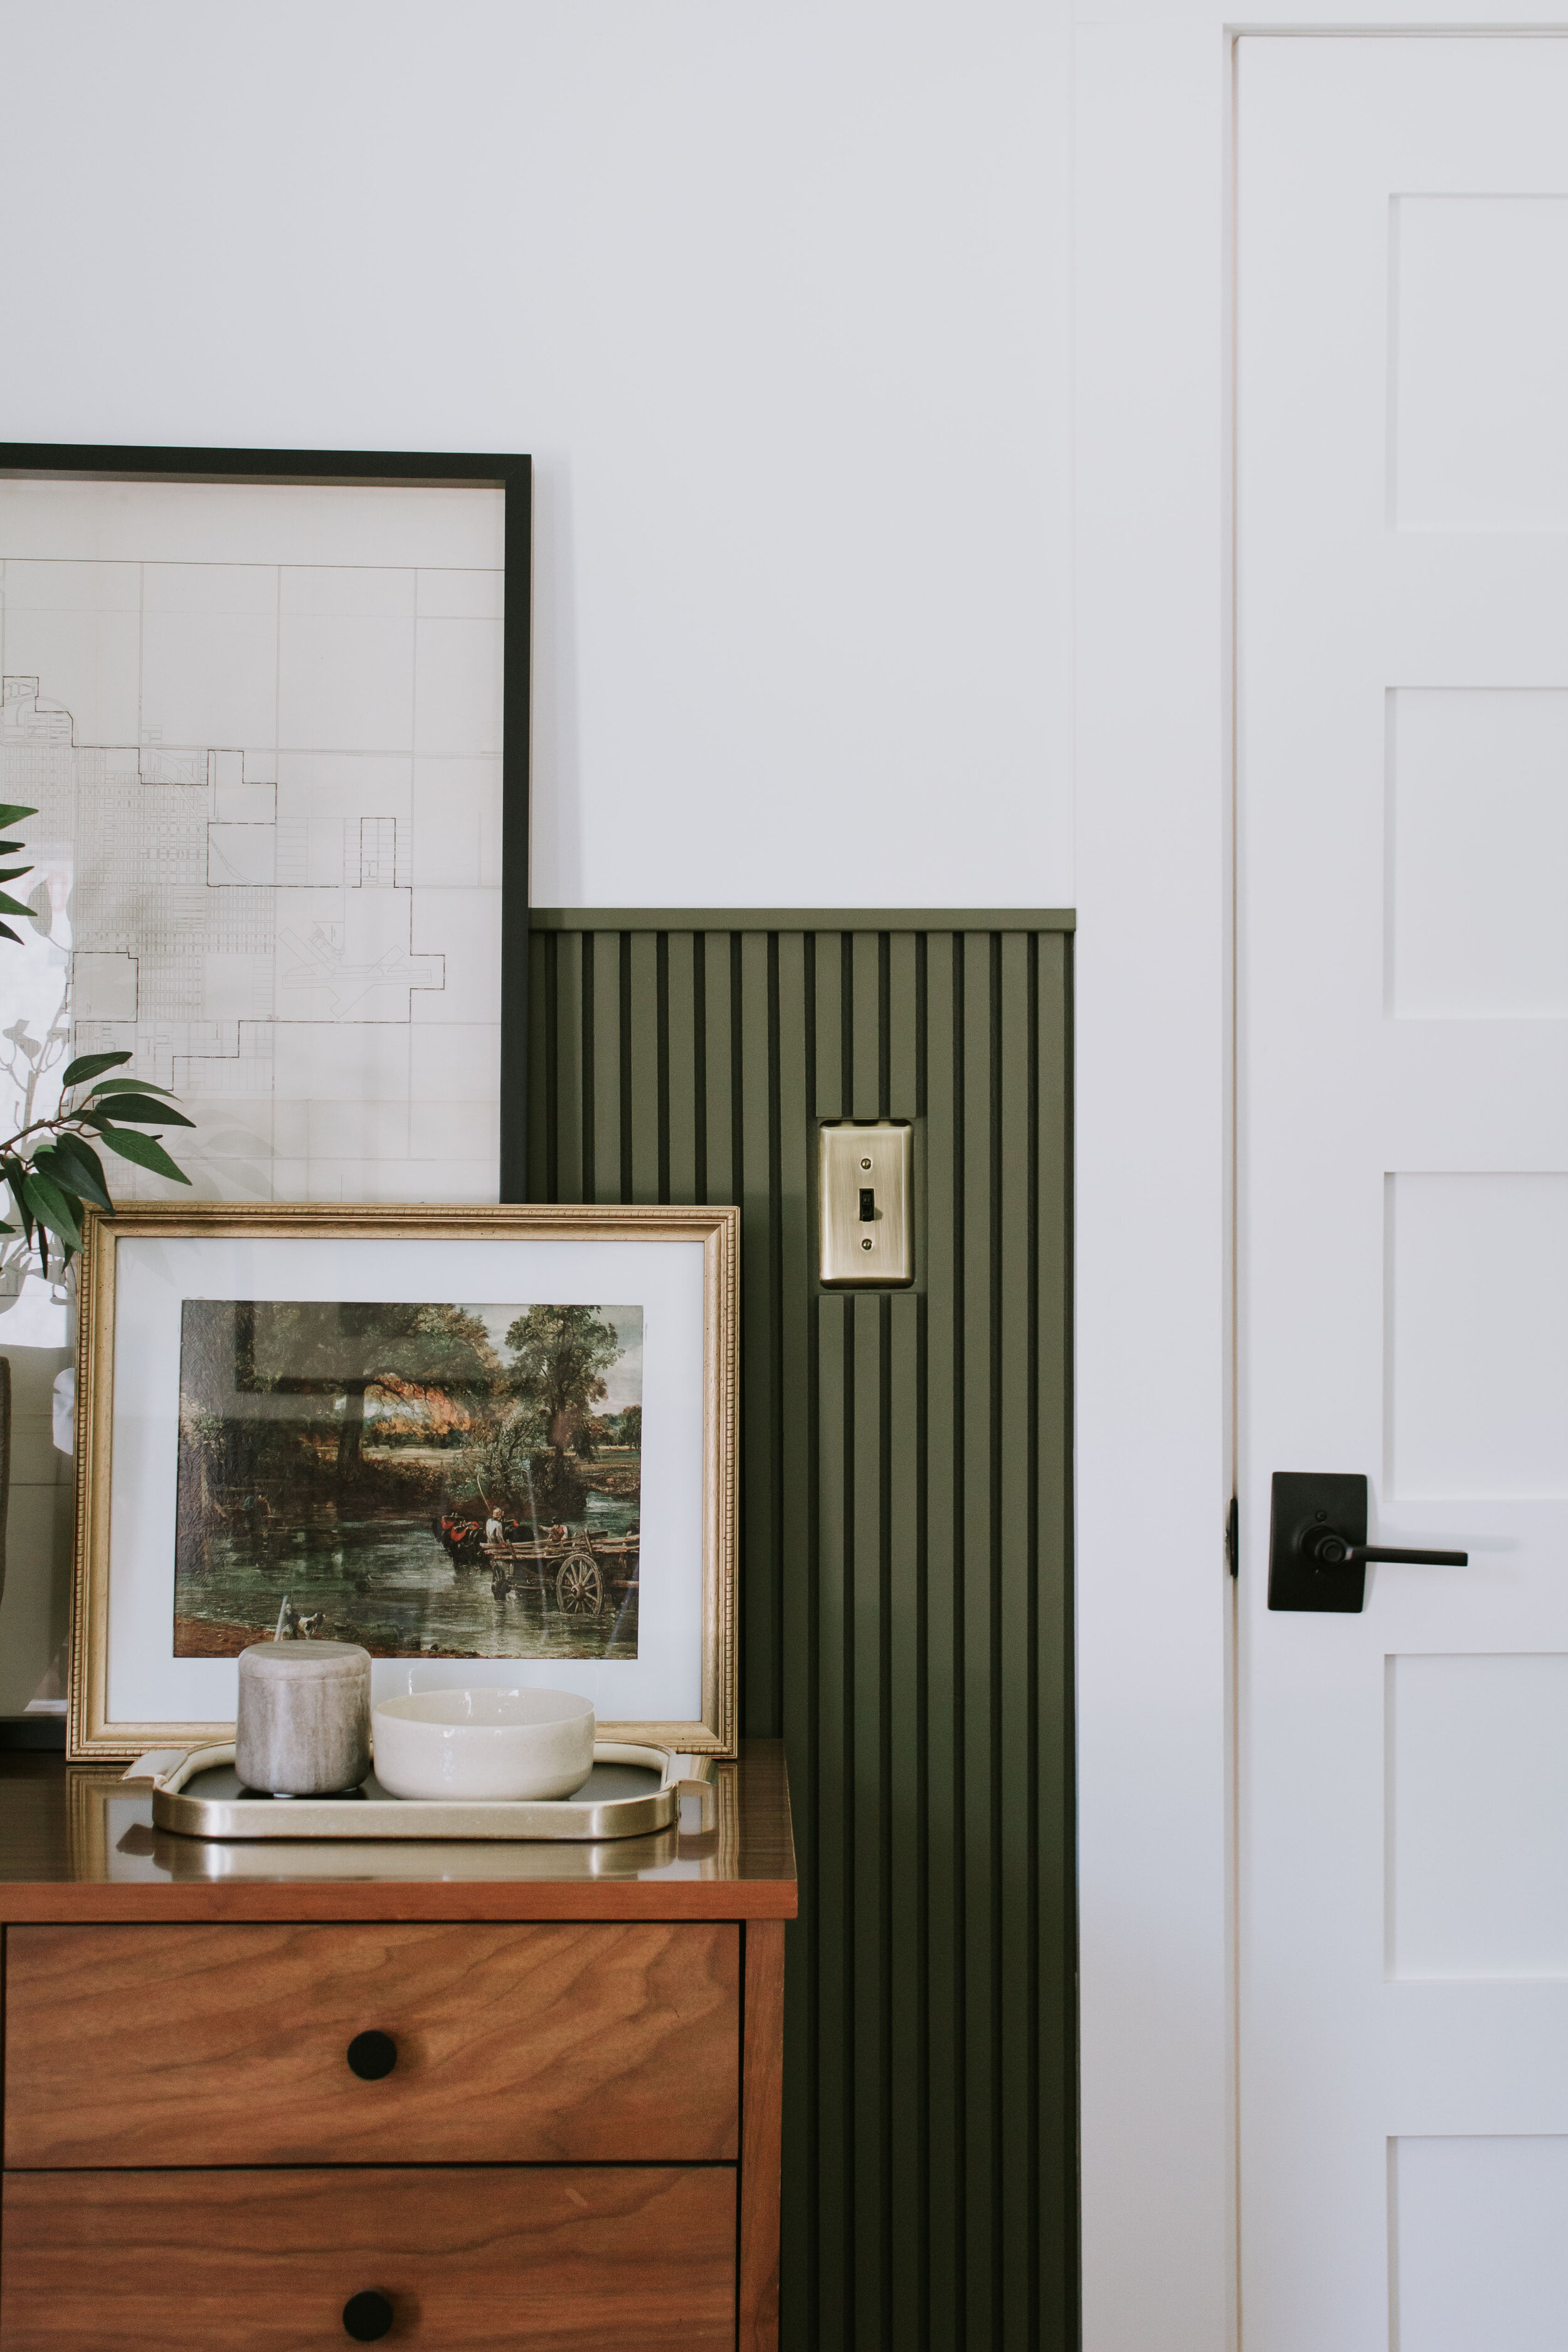 $20 Upgrade - Swapping out our standard switch and outlet covers for brushed brass designer wall plates. Inexpensive outlet and switch covers that aren't boring. | Nadine Stay